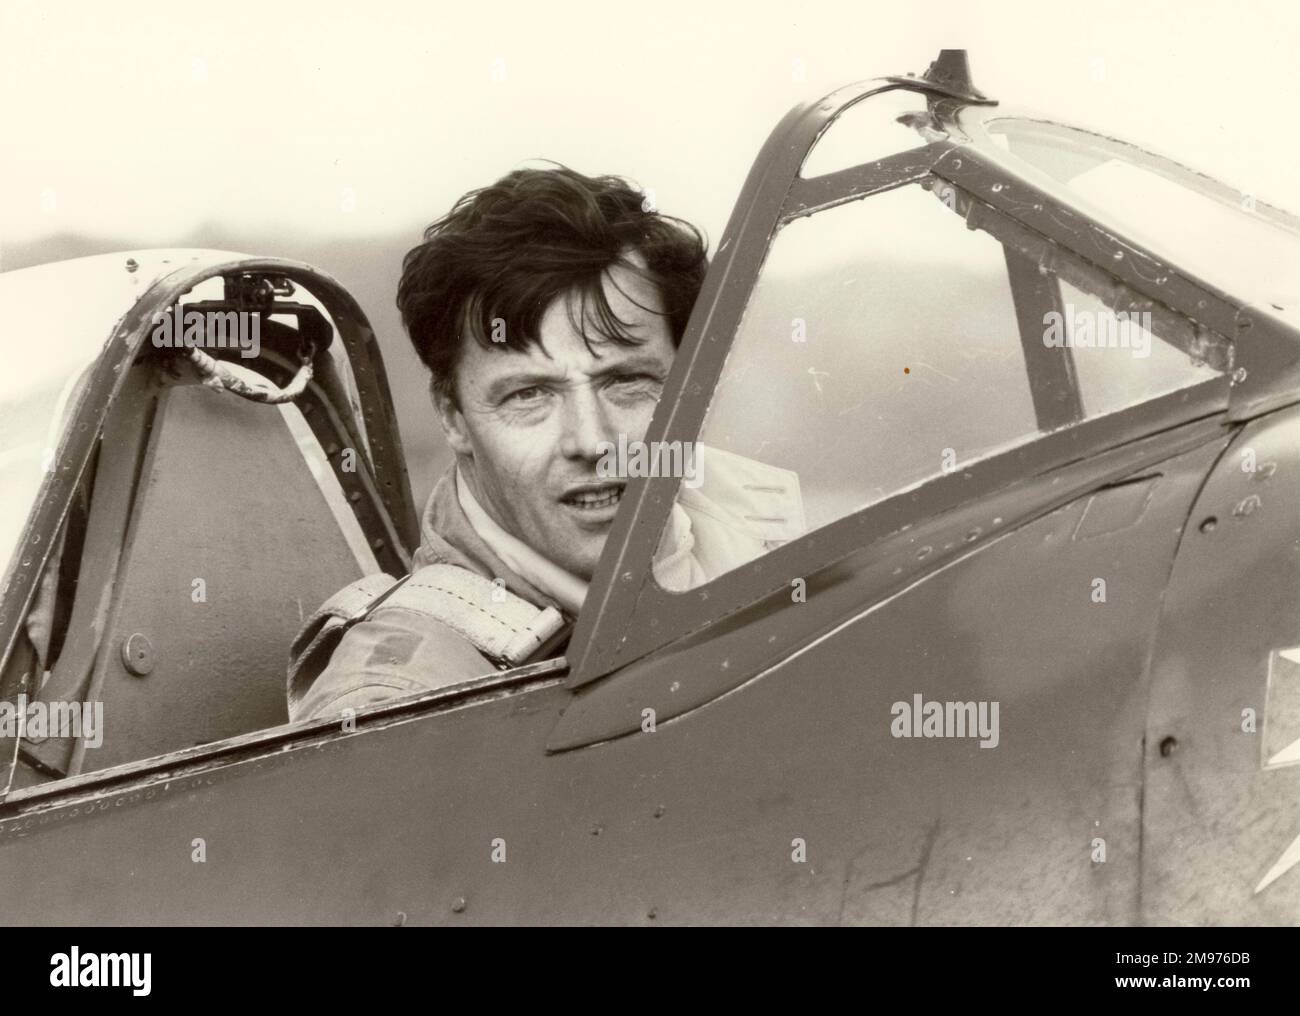 Raynham ‘Ray’ George Hanna, AFC, (1928-2005) in the cockpit of Spitfire IXB, MH434. James Gilbert photo. Stock Photo